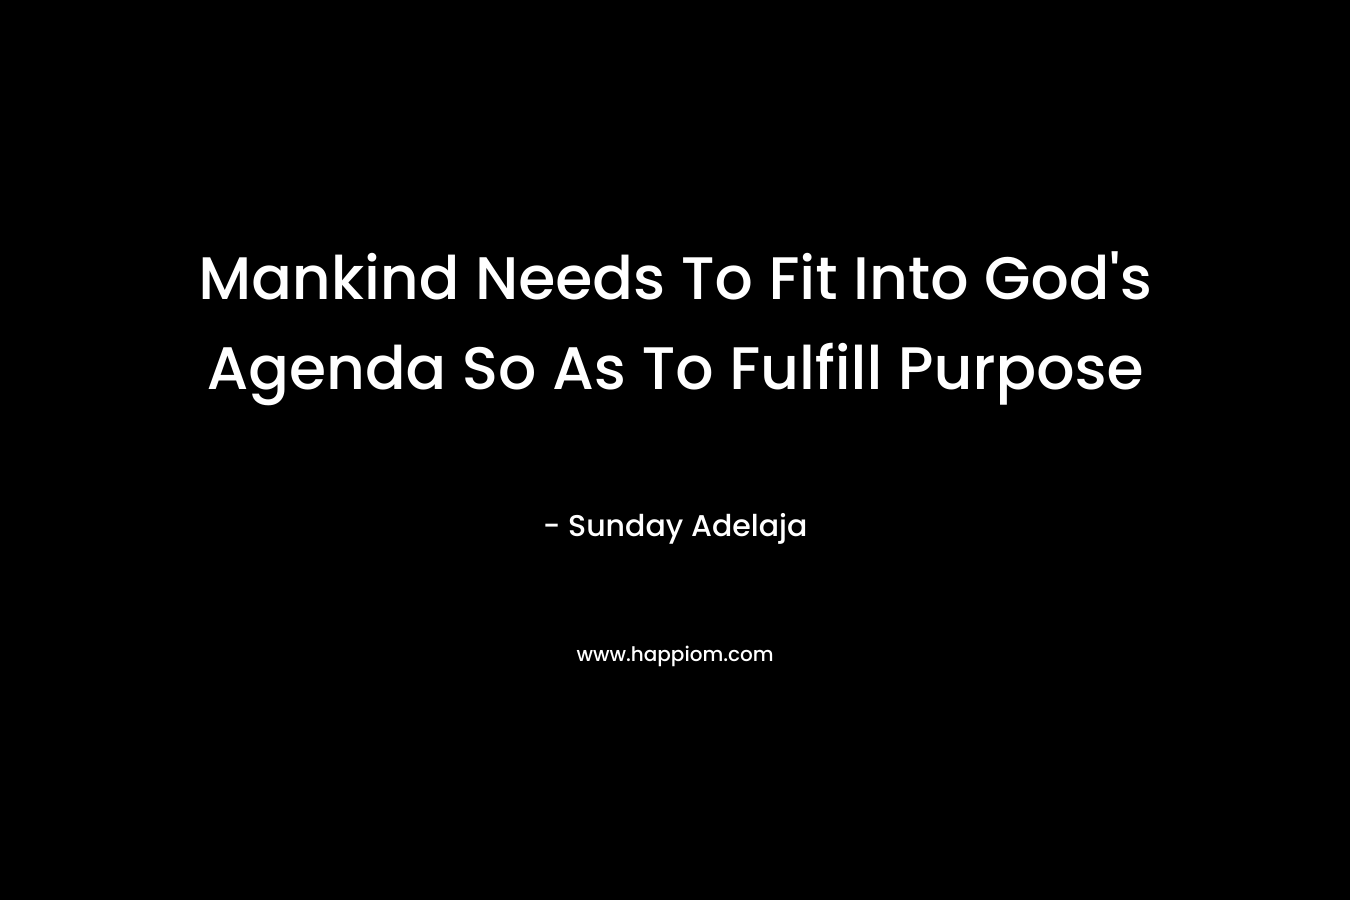 Mankind Needs To Fit Into God’s Agenda So As To Fulfill Purpose – Sunday Adelaja